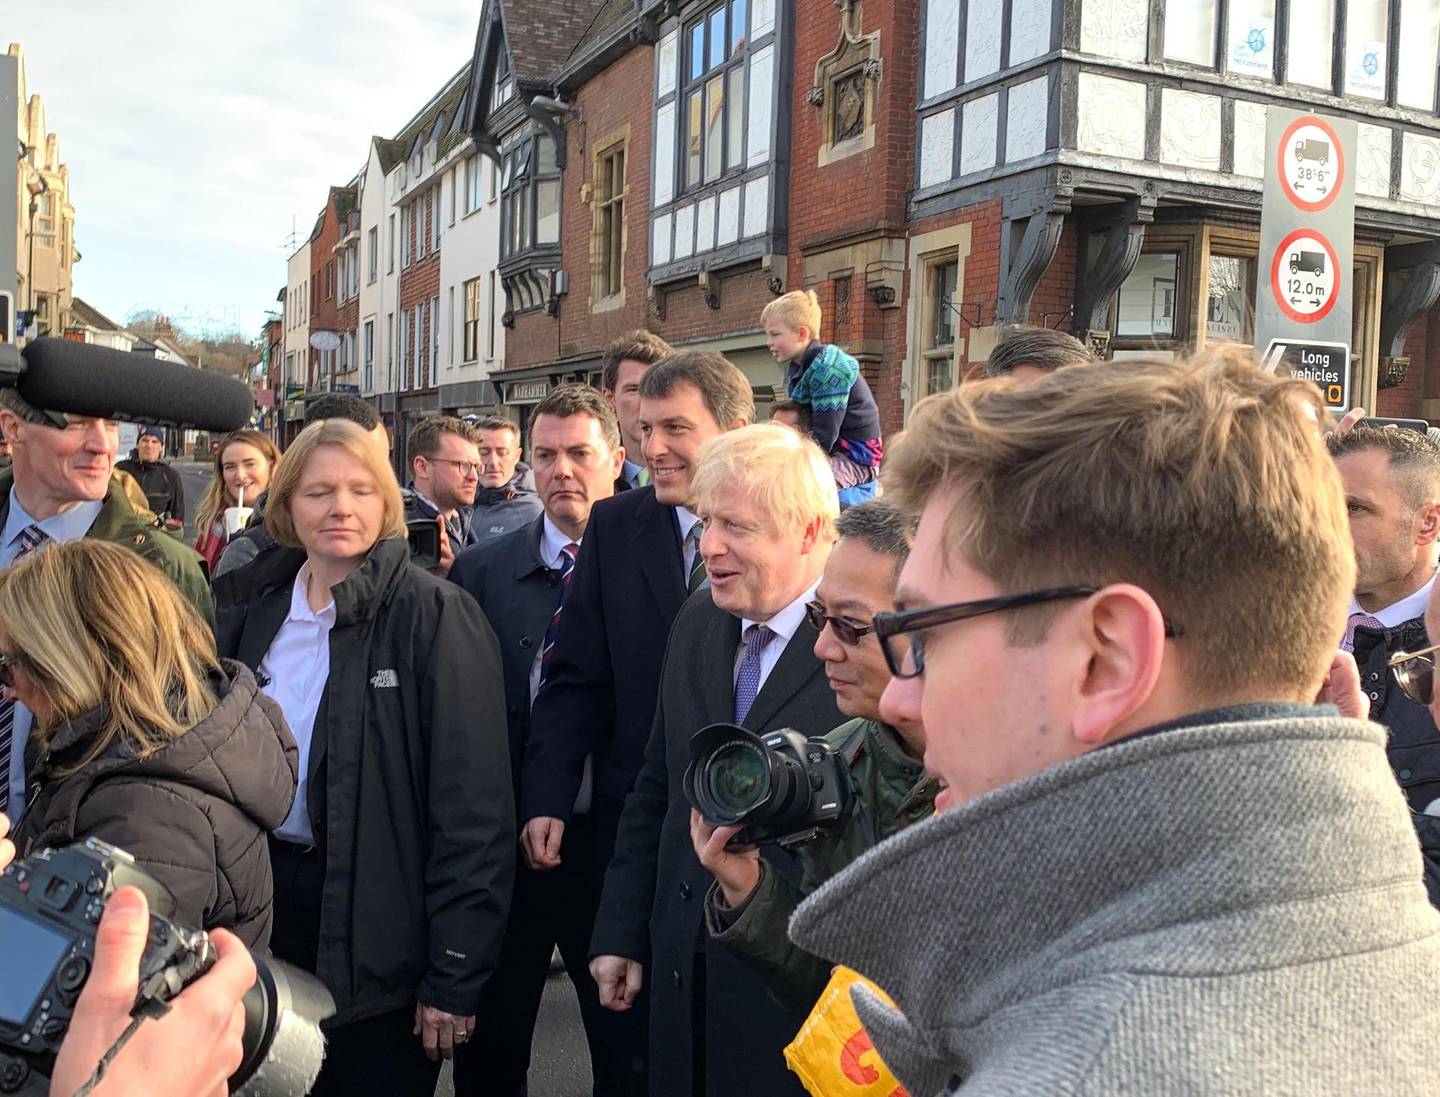 UK Prime Minister Boris Johnson walks around Salisbury with local Member of Parliament John Glenn, who was re-elected as the town's MP last month. Peter Cooper for The National.